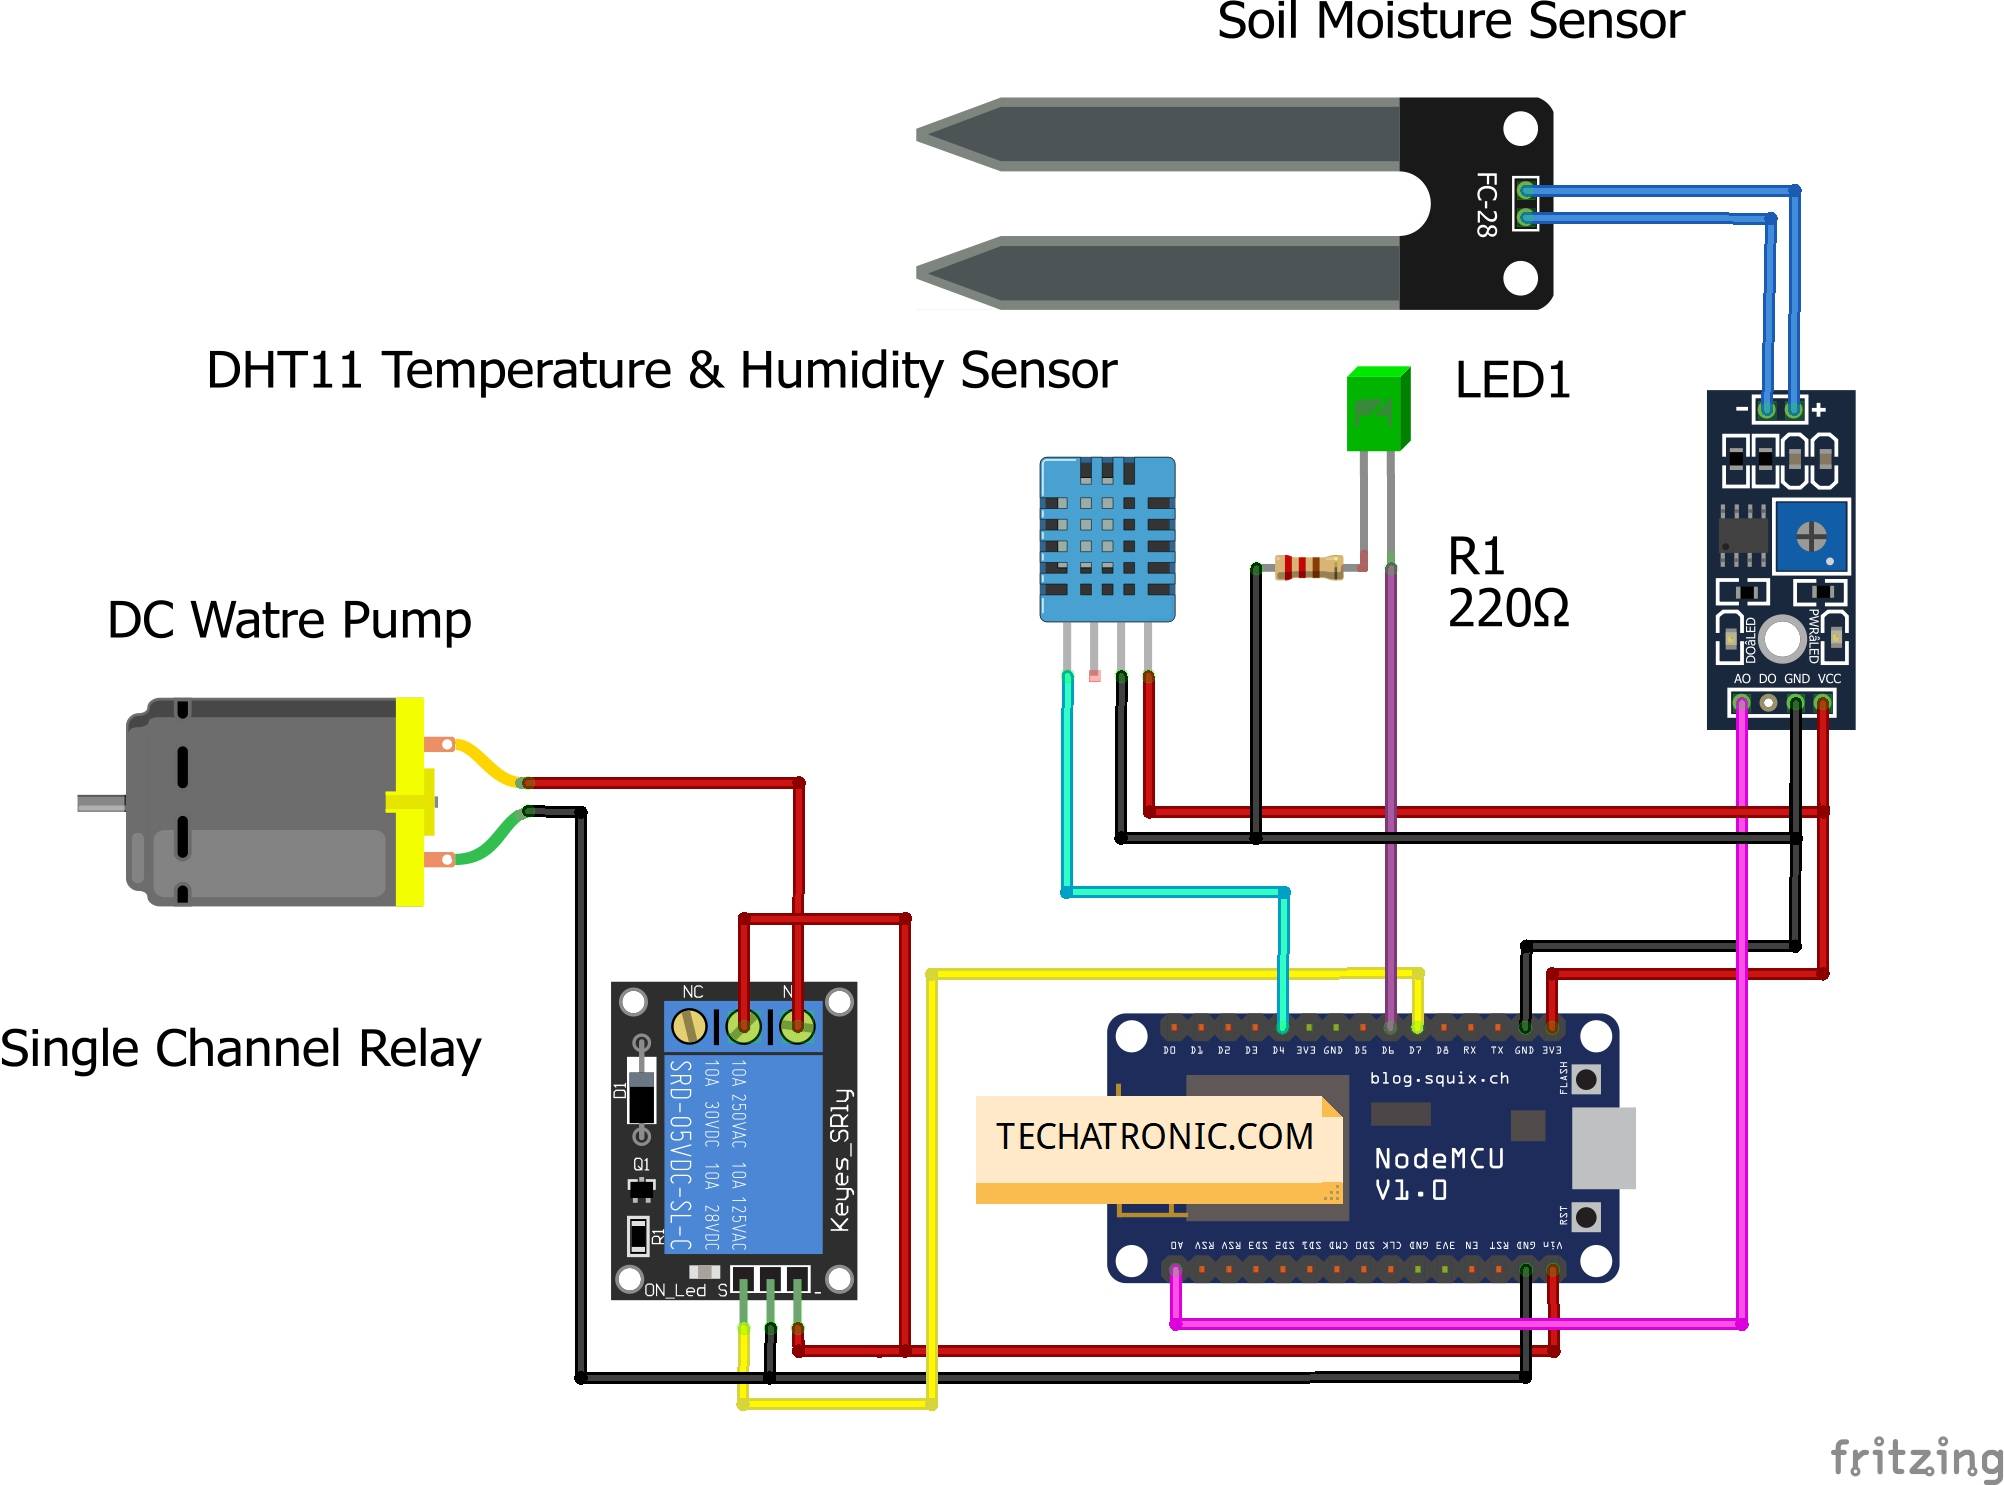 Hey Folks, I’m back again with a very interesting and almost most useful project related to irrigation. IoT based smart irrigation. People who love 